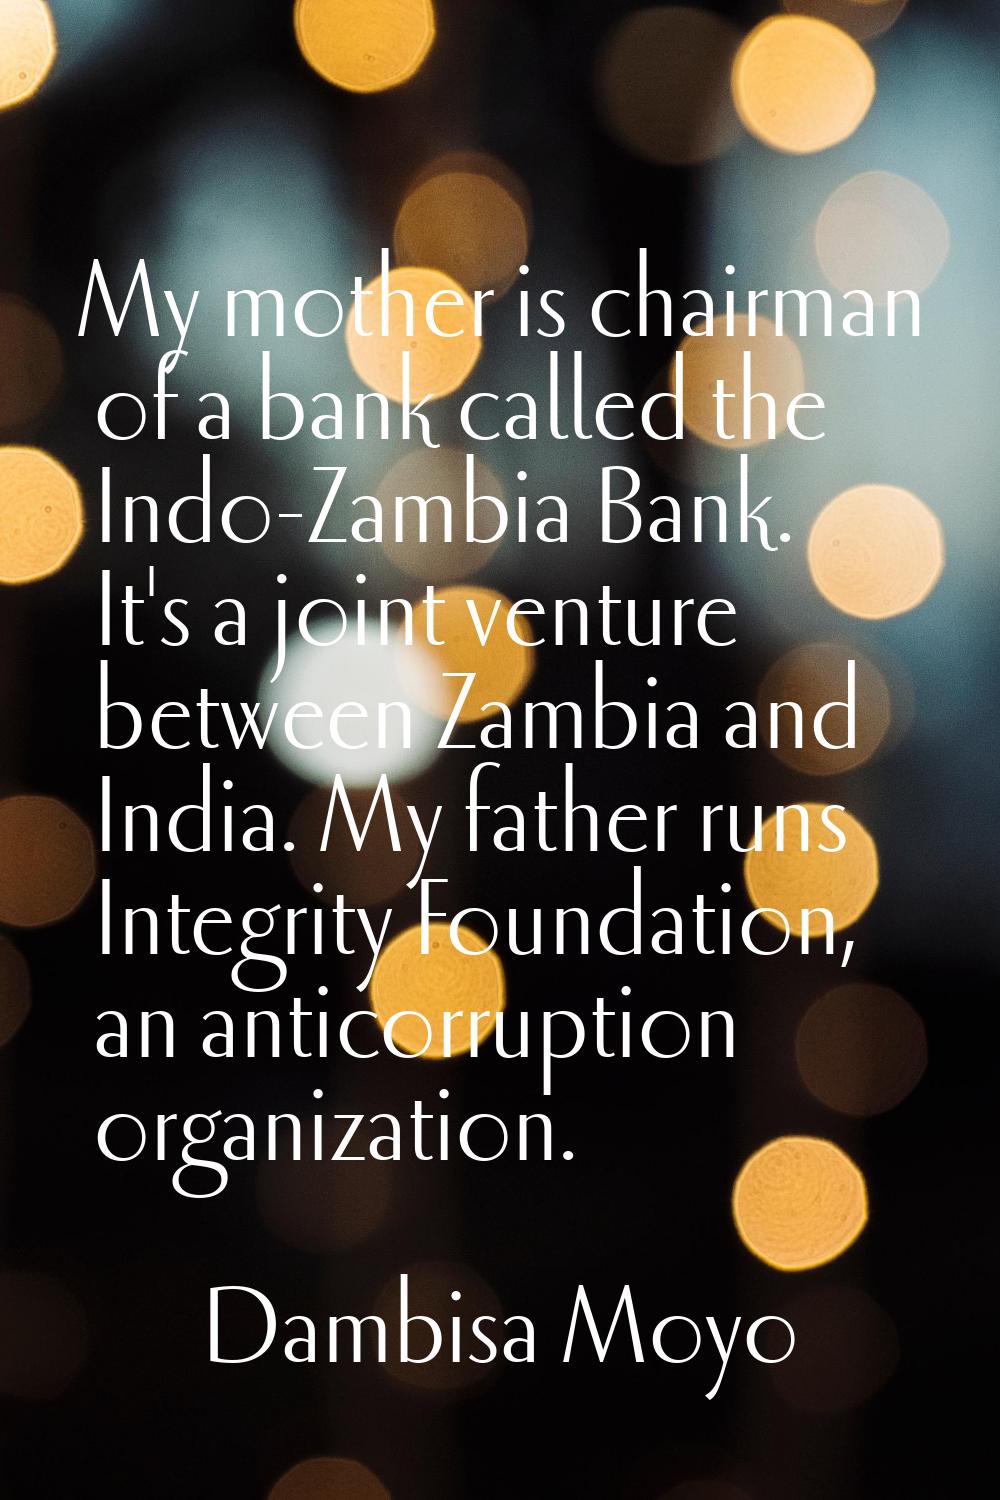 My mother is chairman of a bank called the Indo-Zambia Bank. It's a joint venture between Zambia an